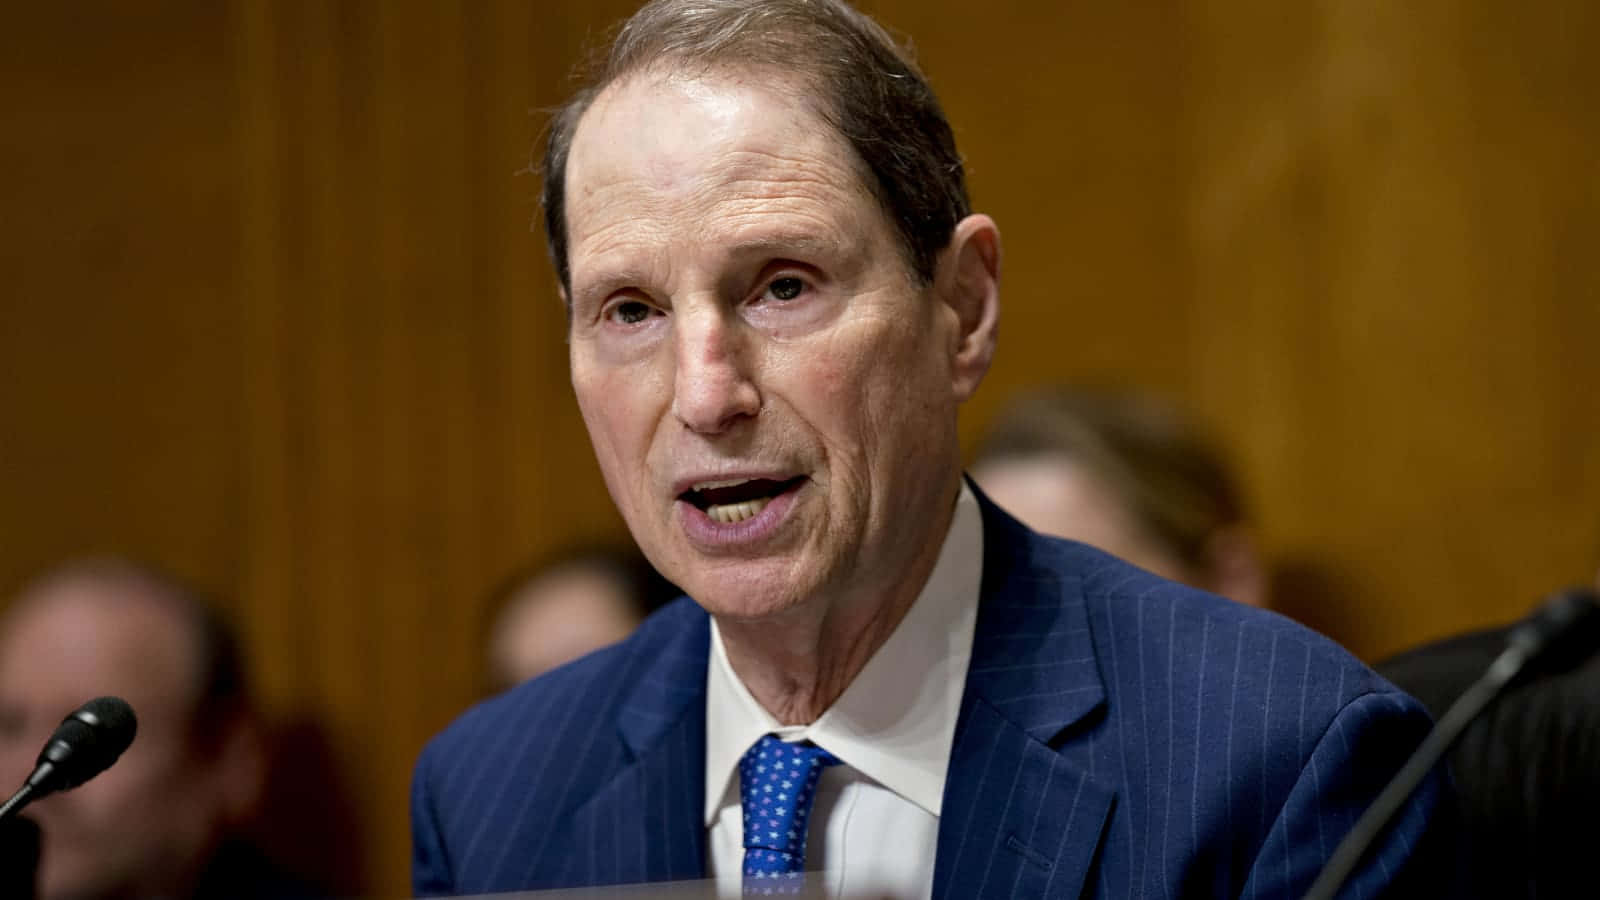 U.S. Senator Ron Wyden looking thoughtful in a blue suit and tie. Wallpaper